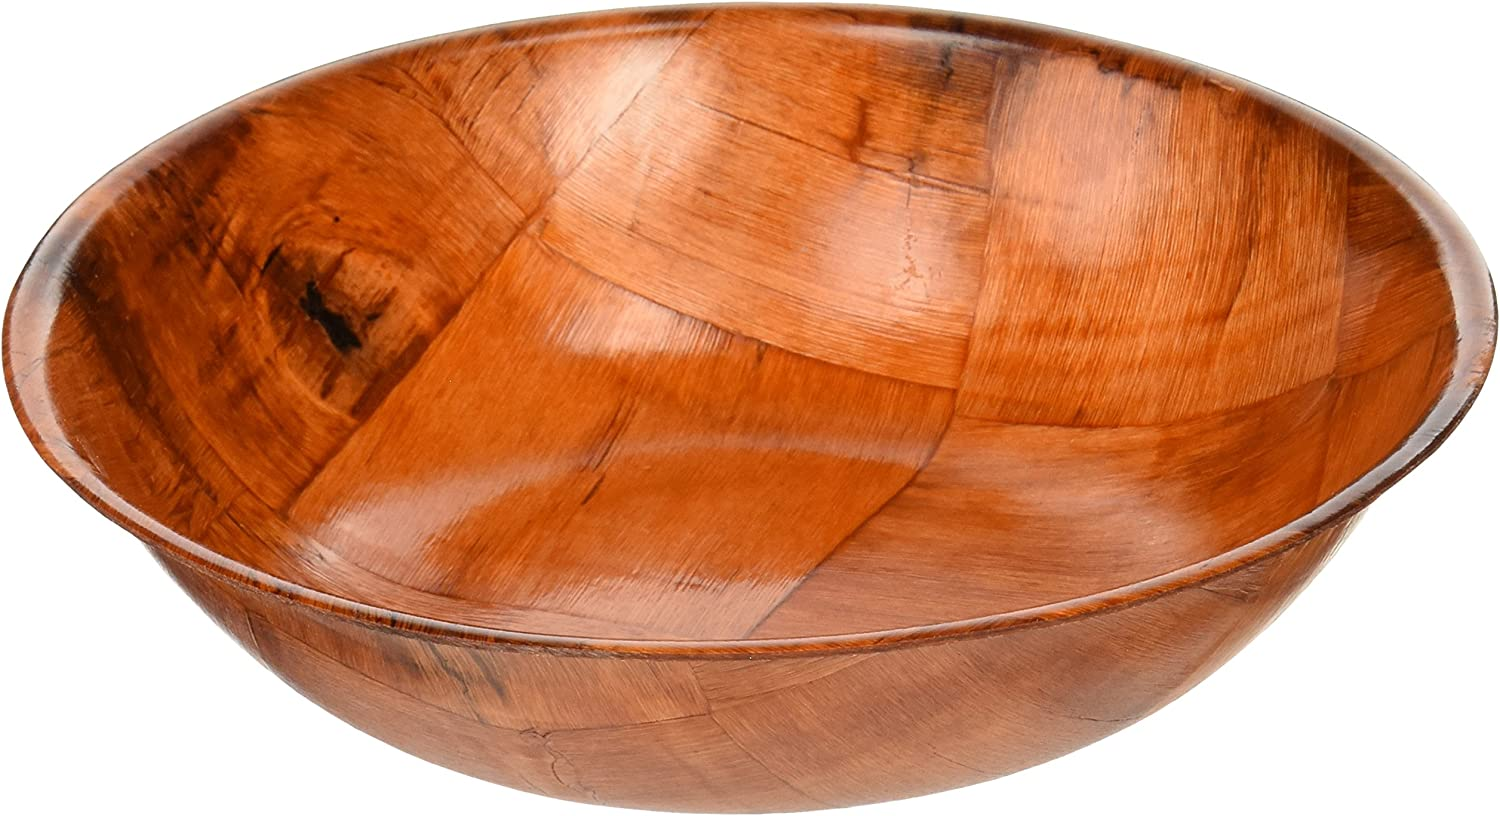 Winco 8-In Woven Wood Salad Bowl $2.27